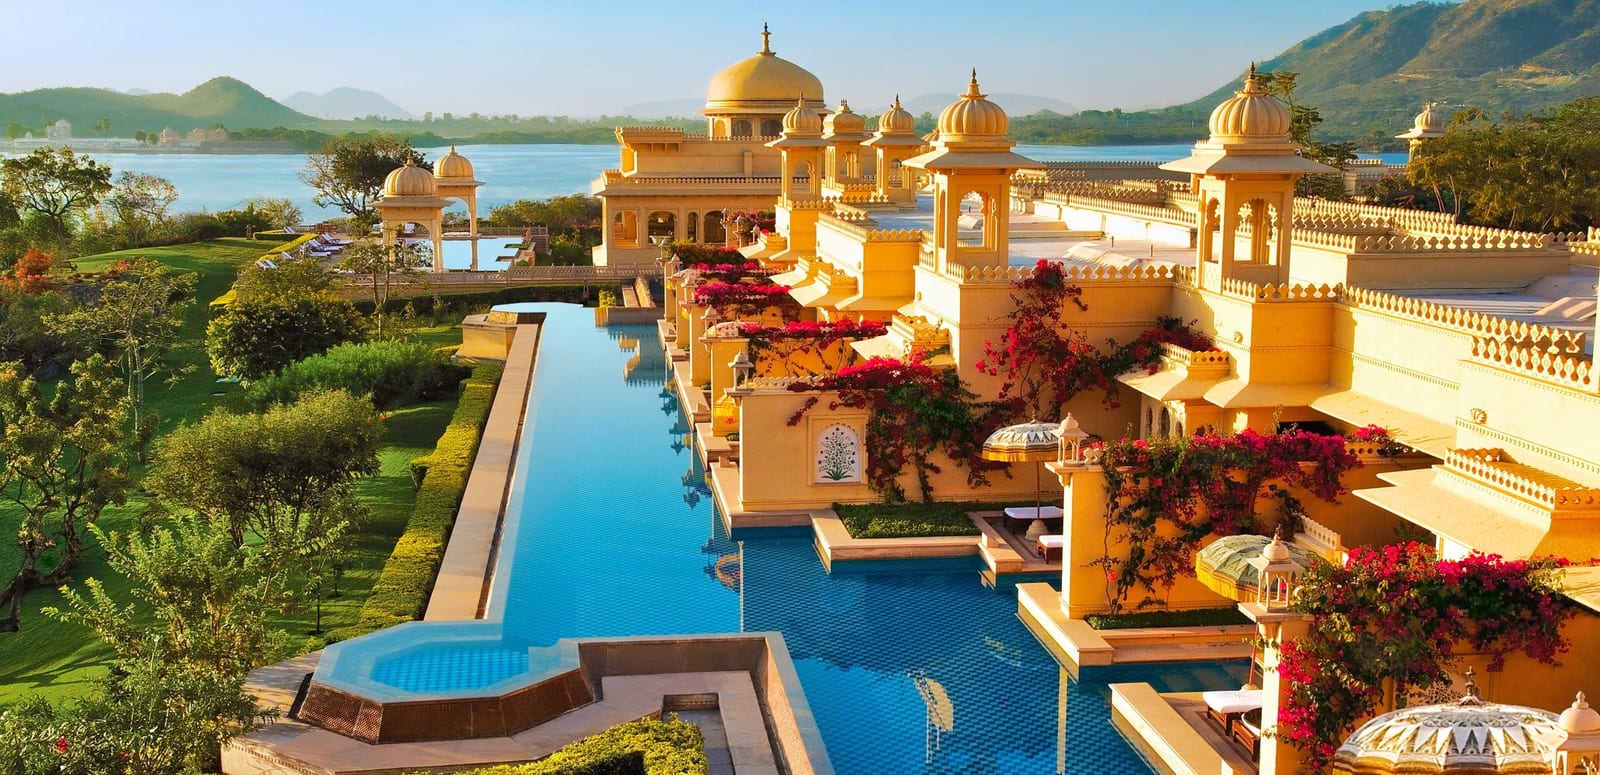 5 Things to do in Udaipur